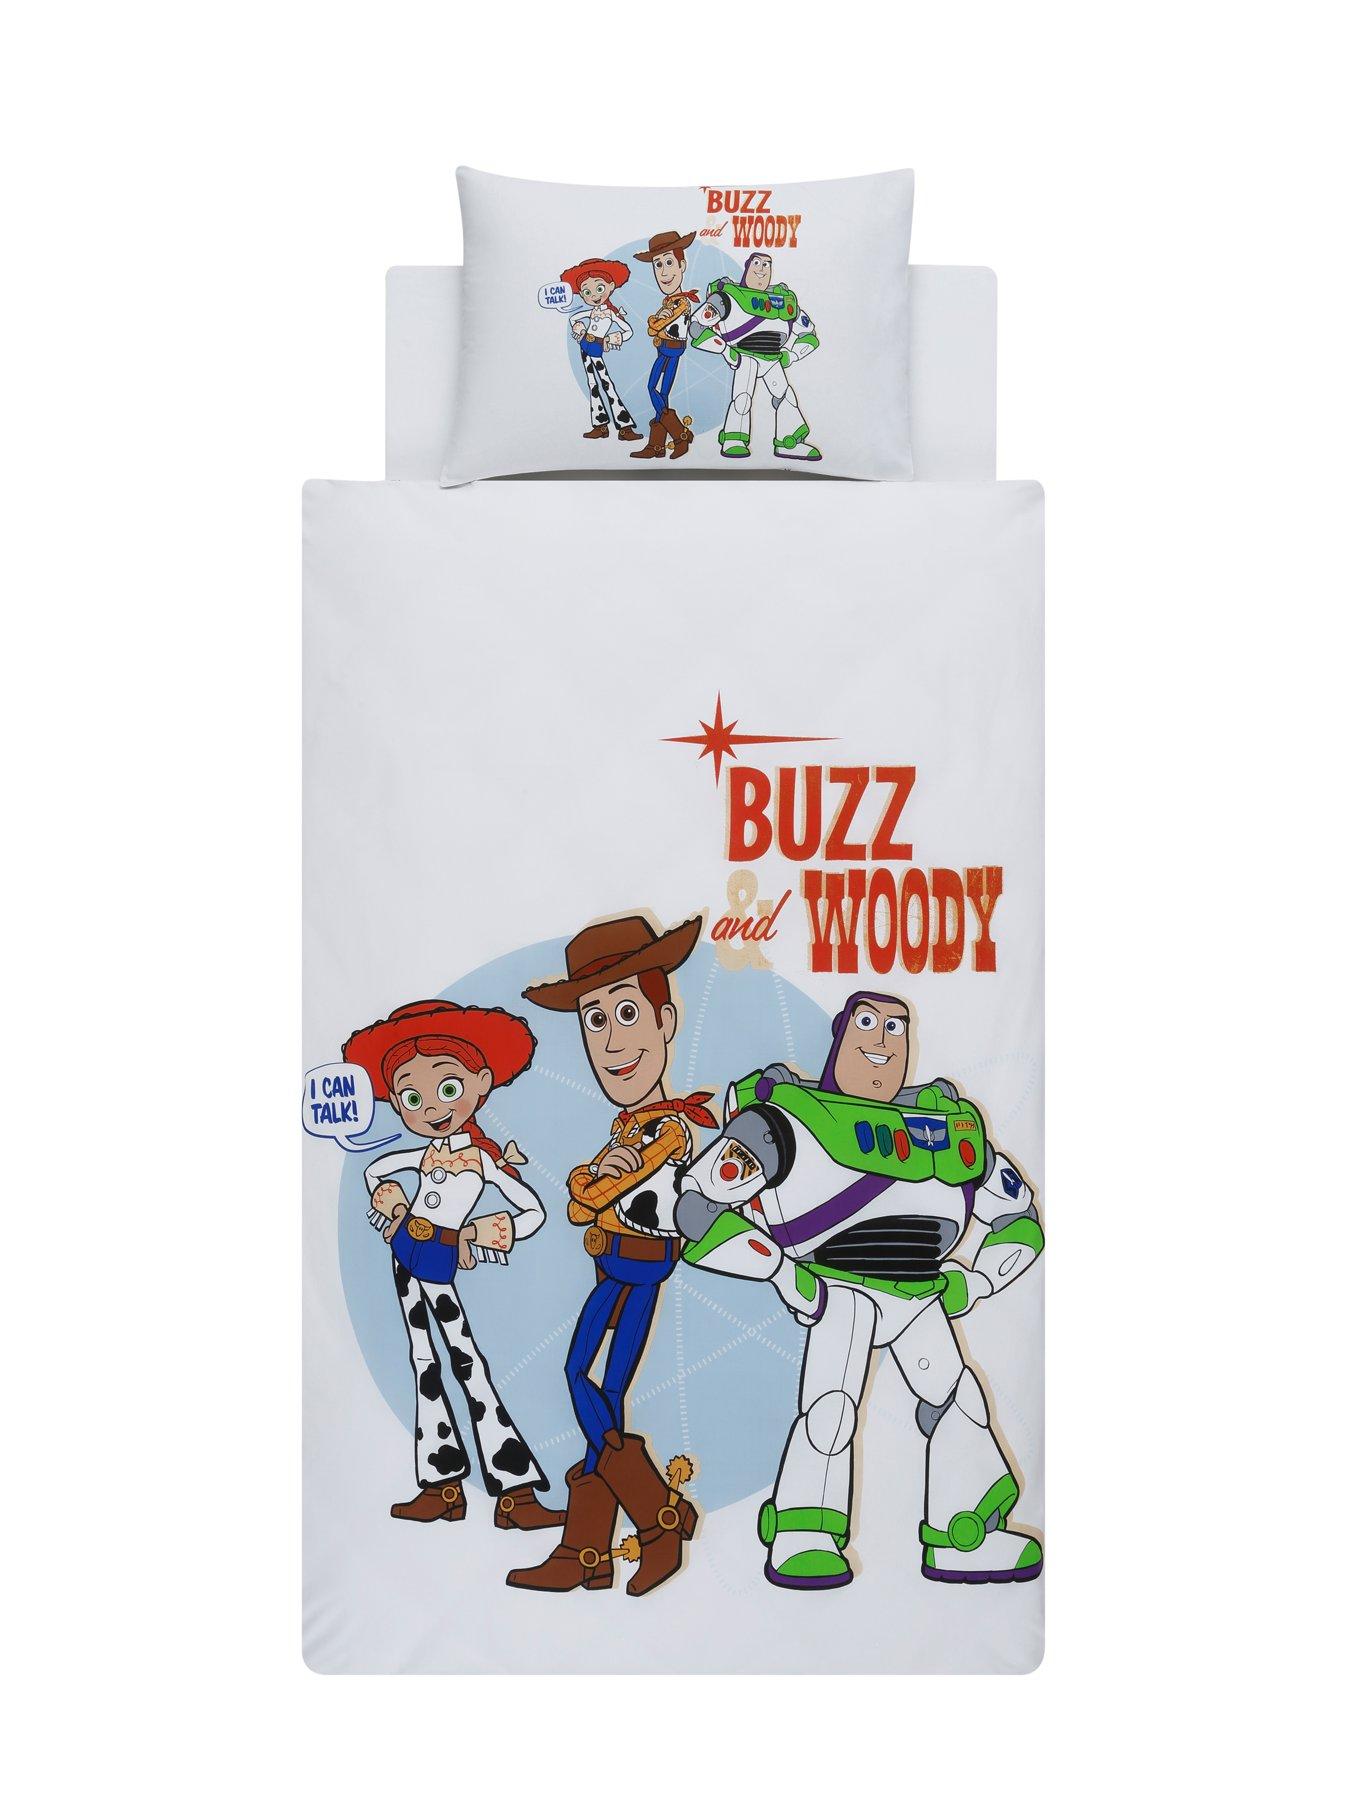 MATCHING CURTAINS 54" DROP TOY STORY 4 RESCUE UK SINGLE DUVET COVER SET 